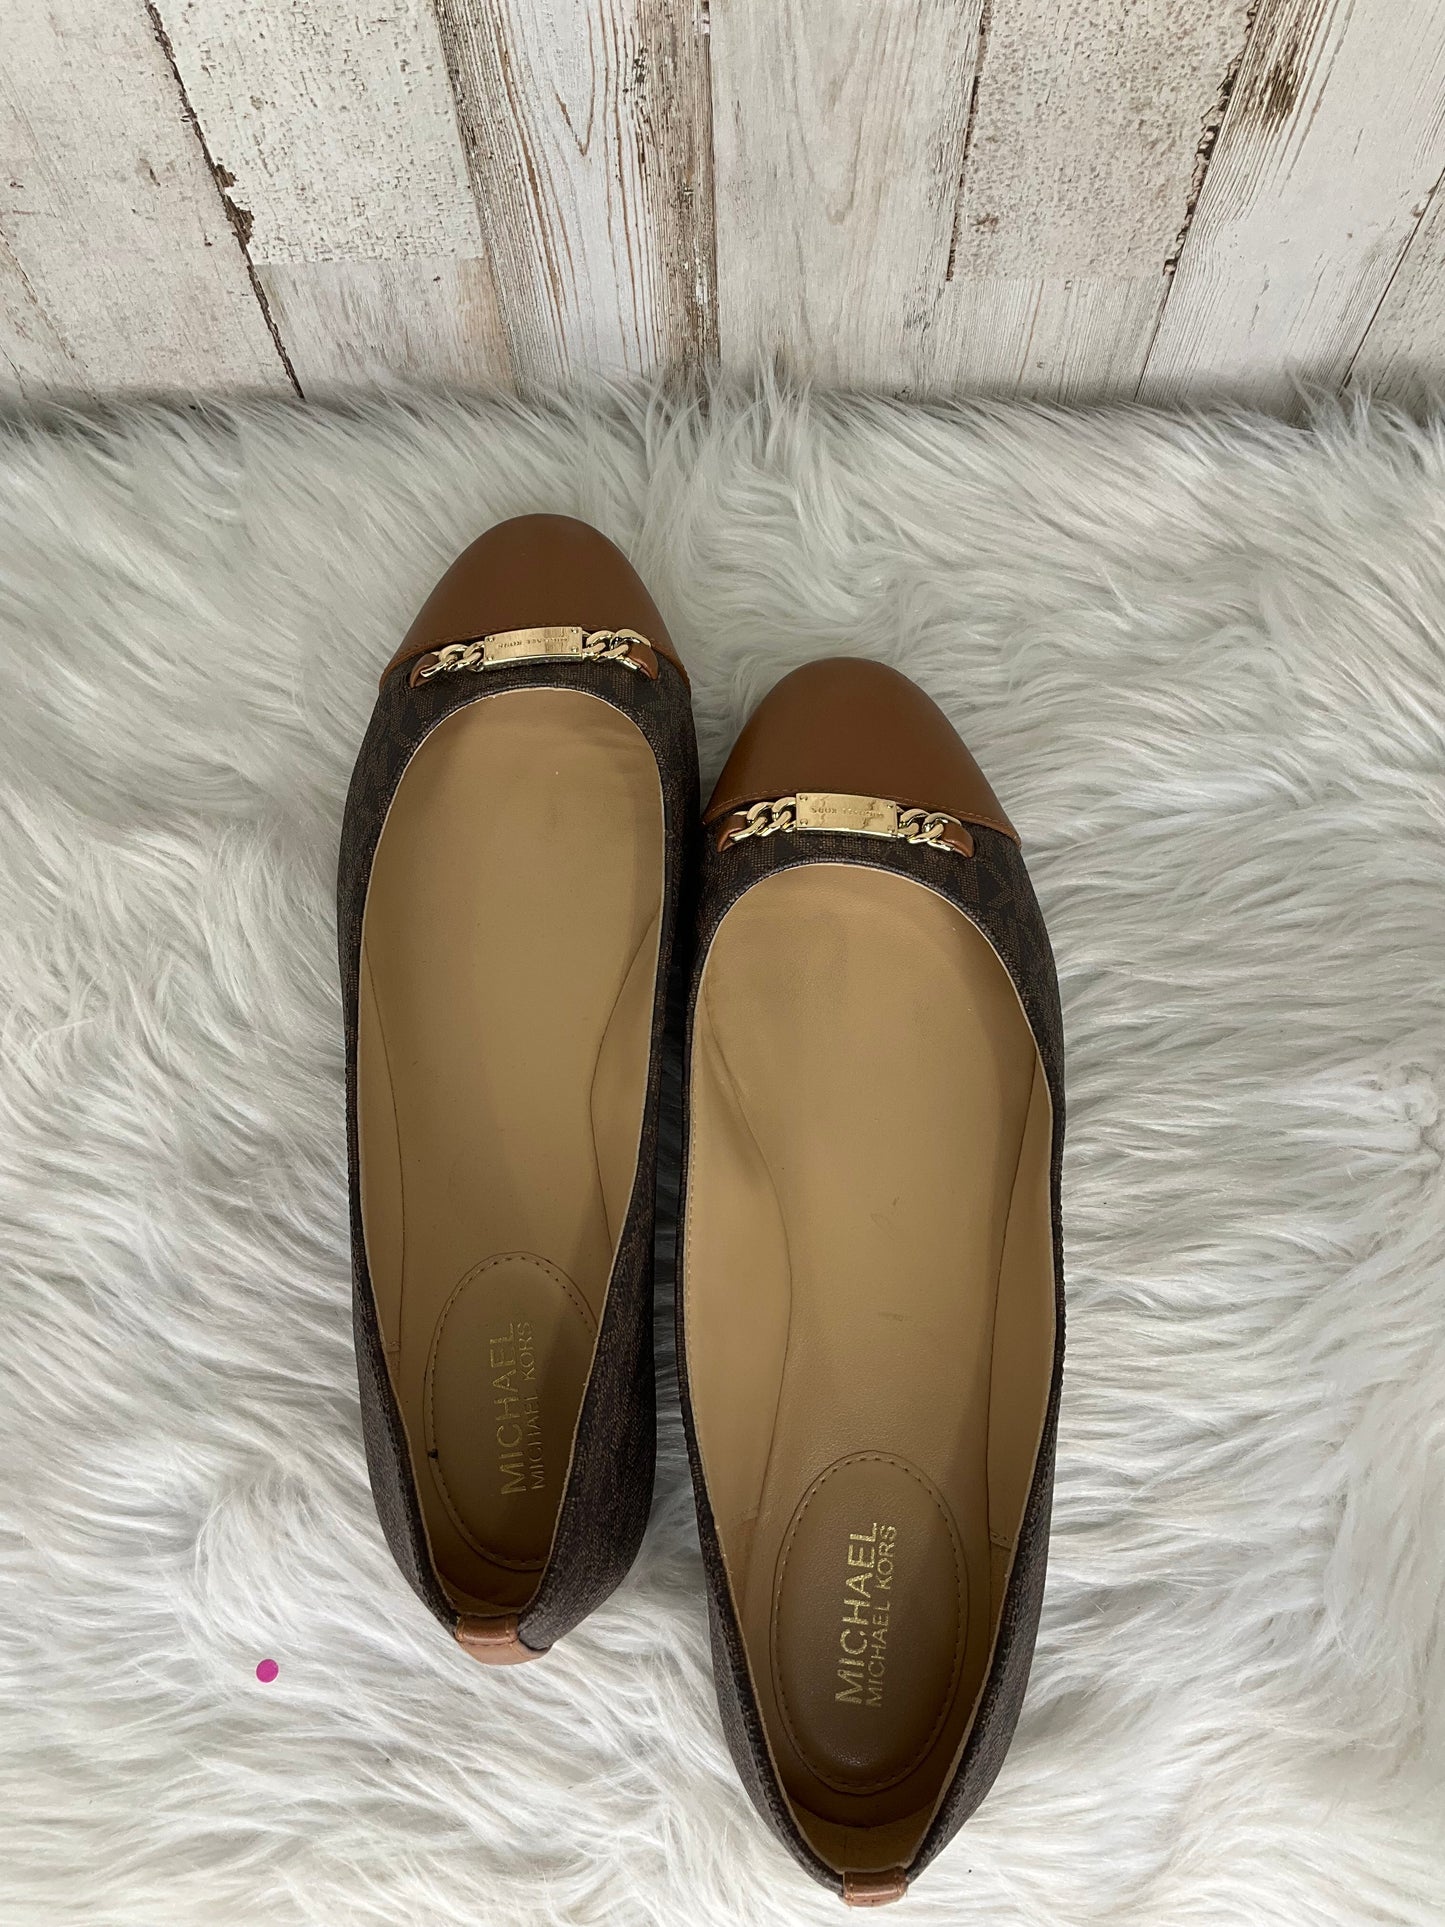 Shoes Flats By Michael Kors  Size: 8